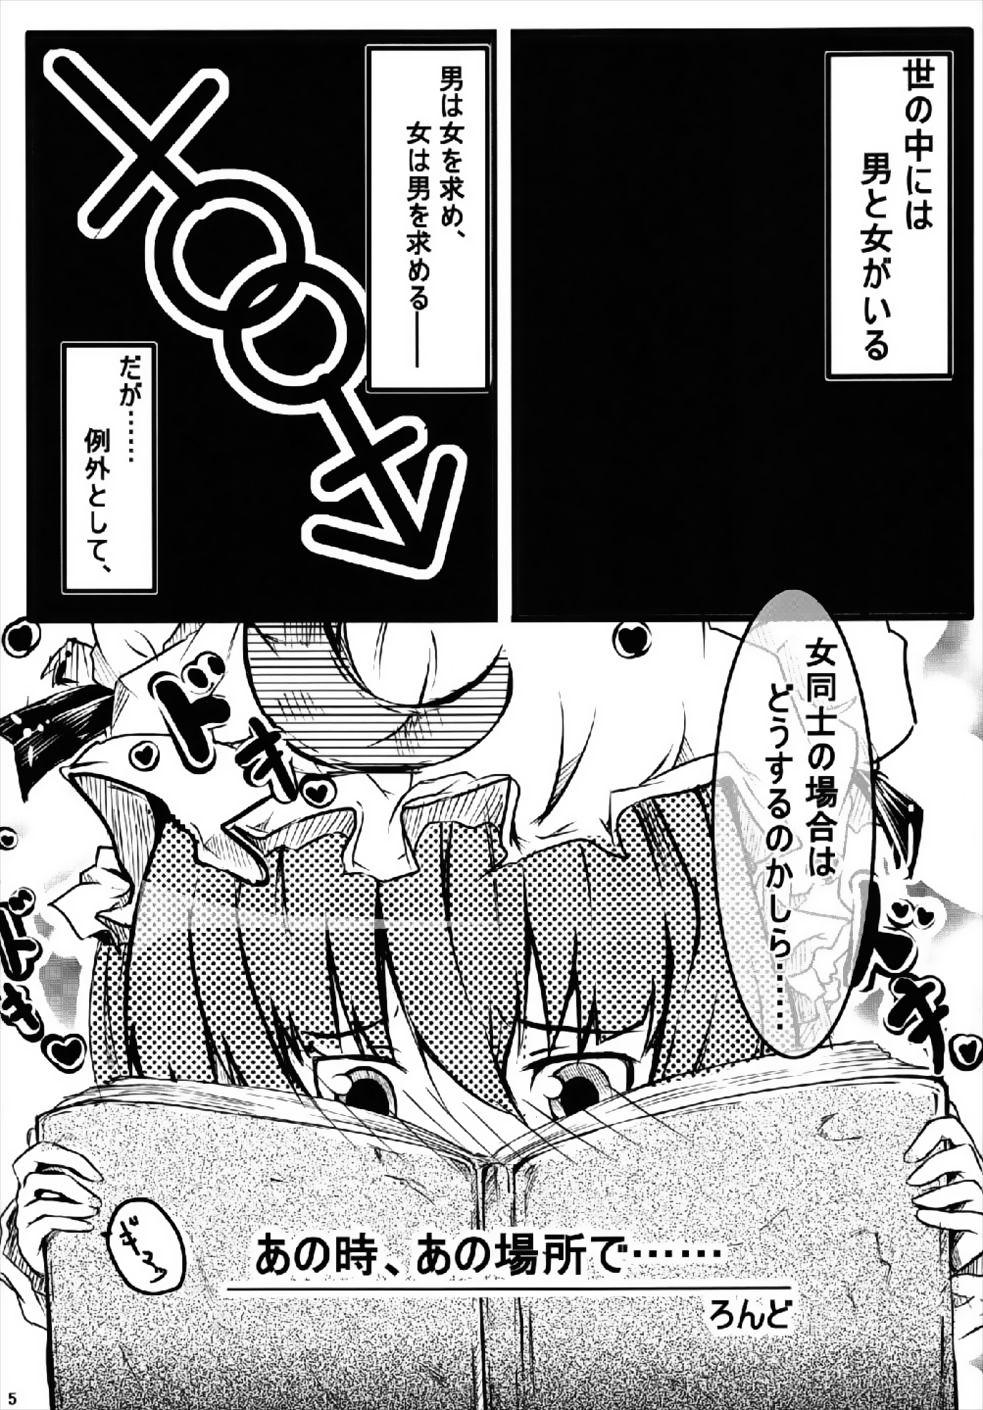 Ass Fetish RemiFlaPatche! - Touhou project Big Booty - Page 4